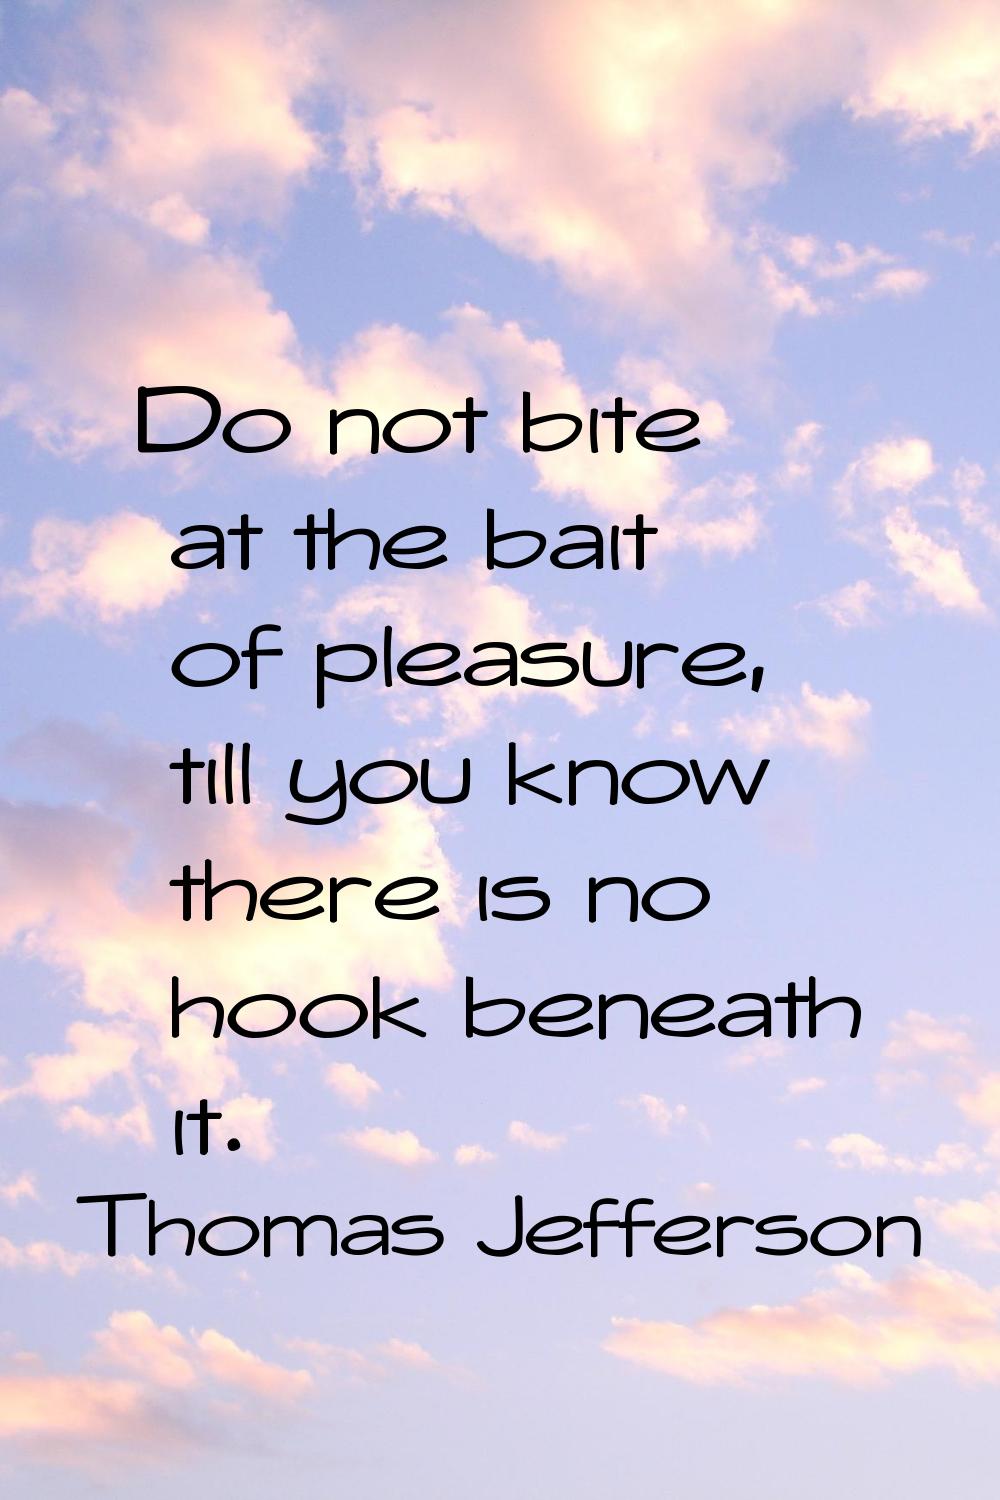 Do not bite at the bait of pleasure, till you know there is no hook beneath it.